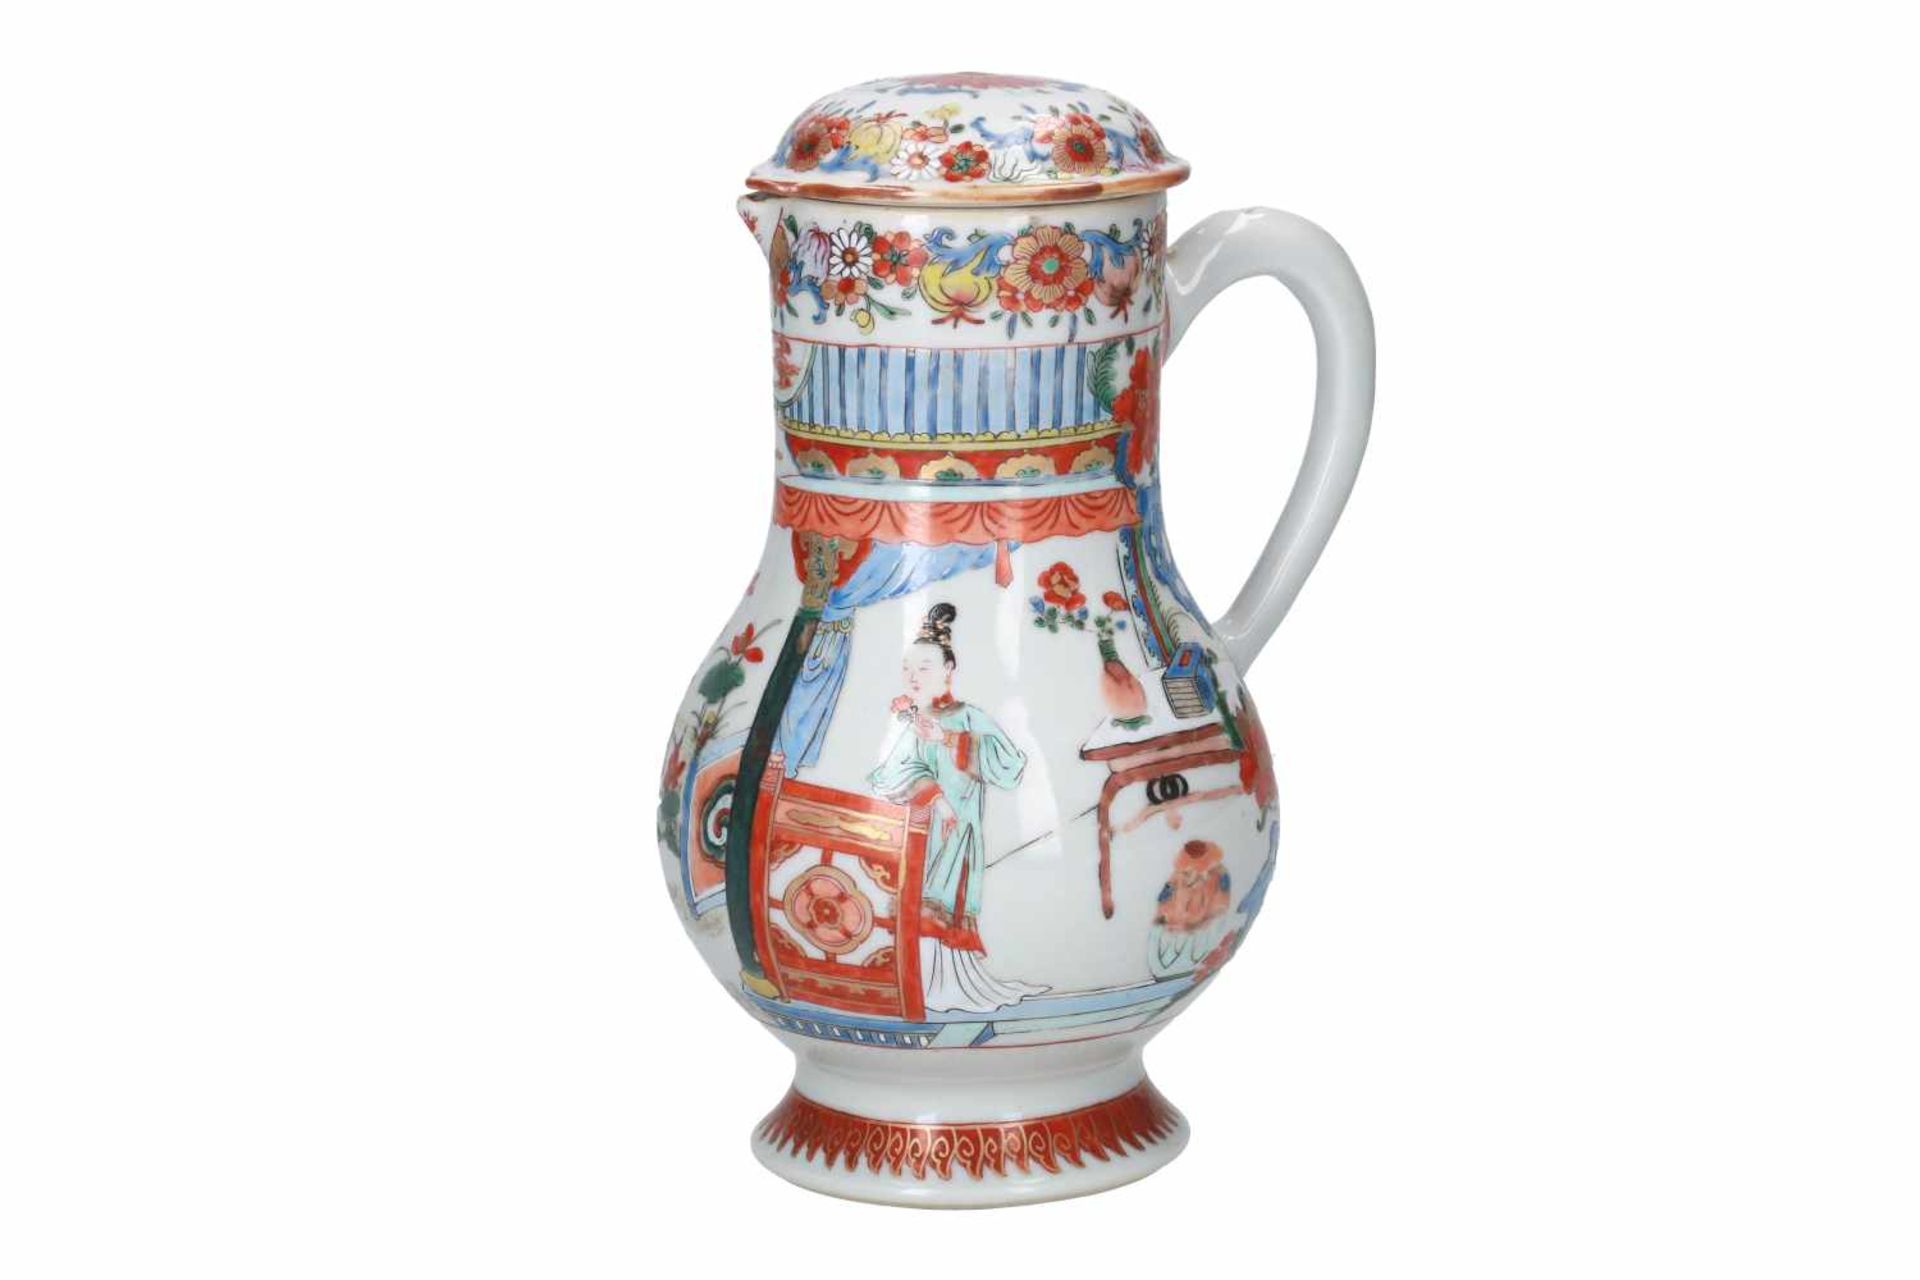 A polychrome porcelain jug, decorated with flowers and scenes with figures. Unmarked. China, Kangxi.